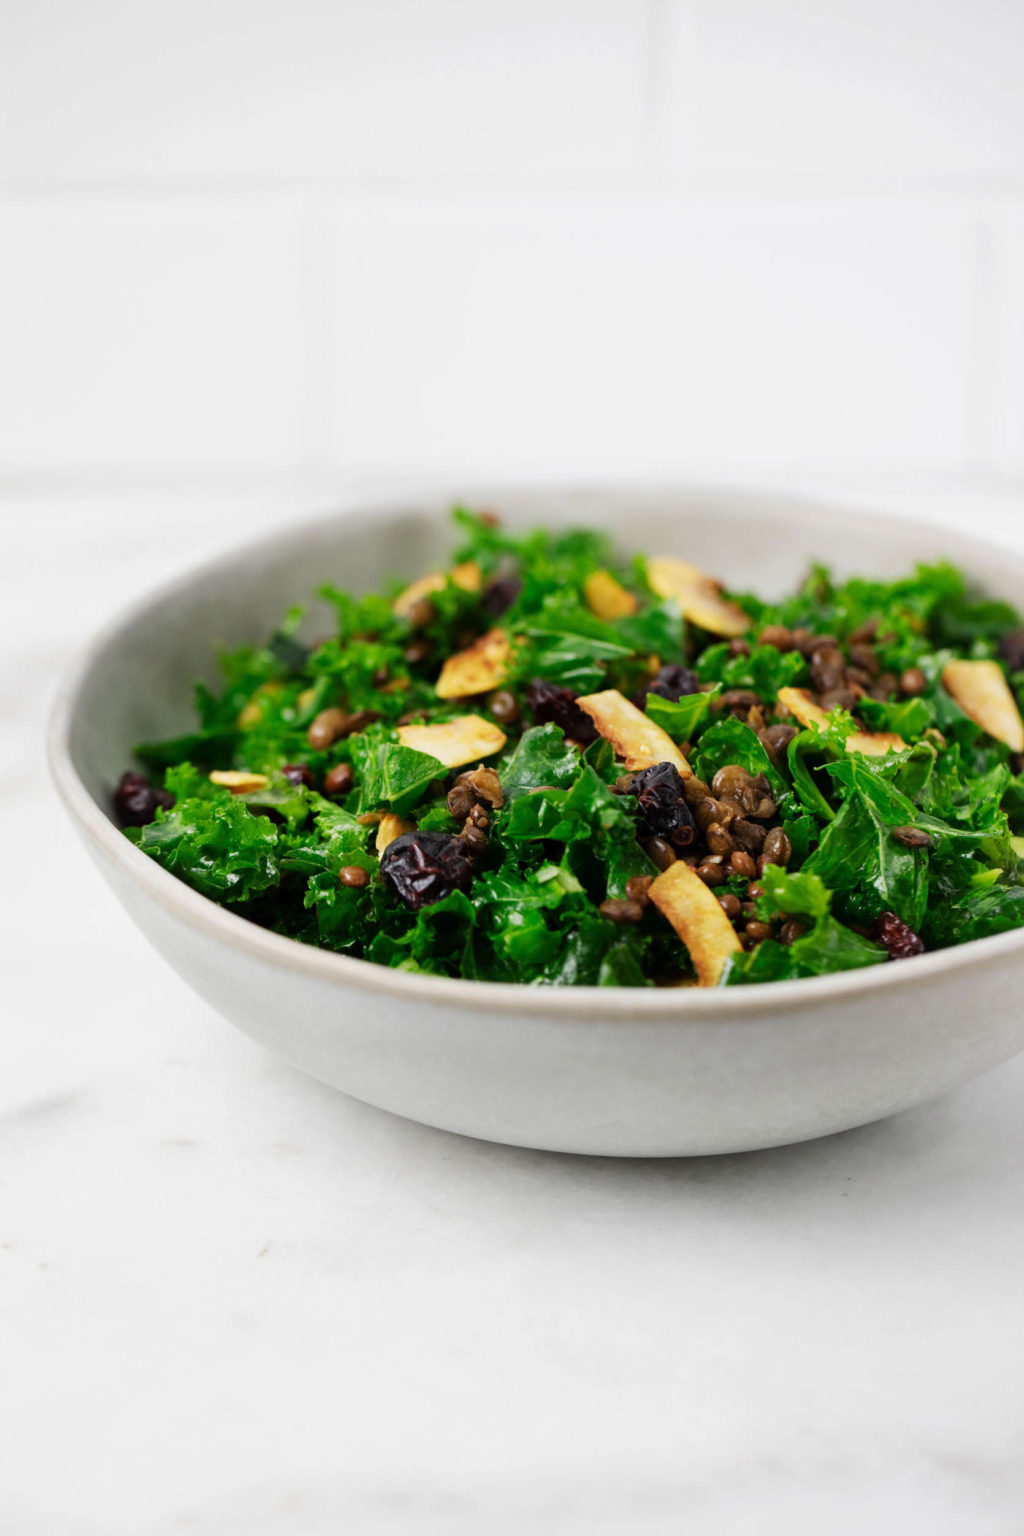 A round, white and gray ceramic bowl holds a festive kale salad with cranberries and coconut bacon.